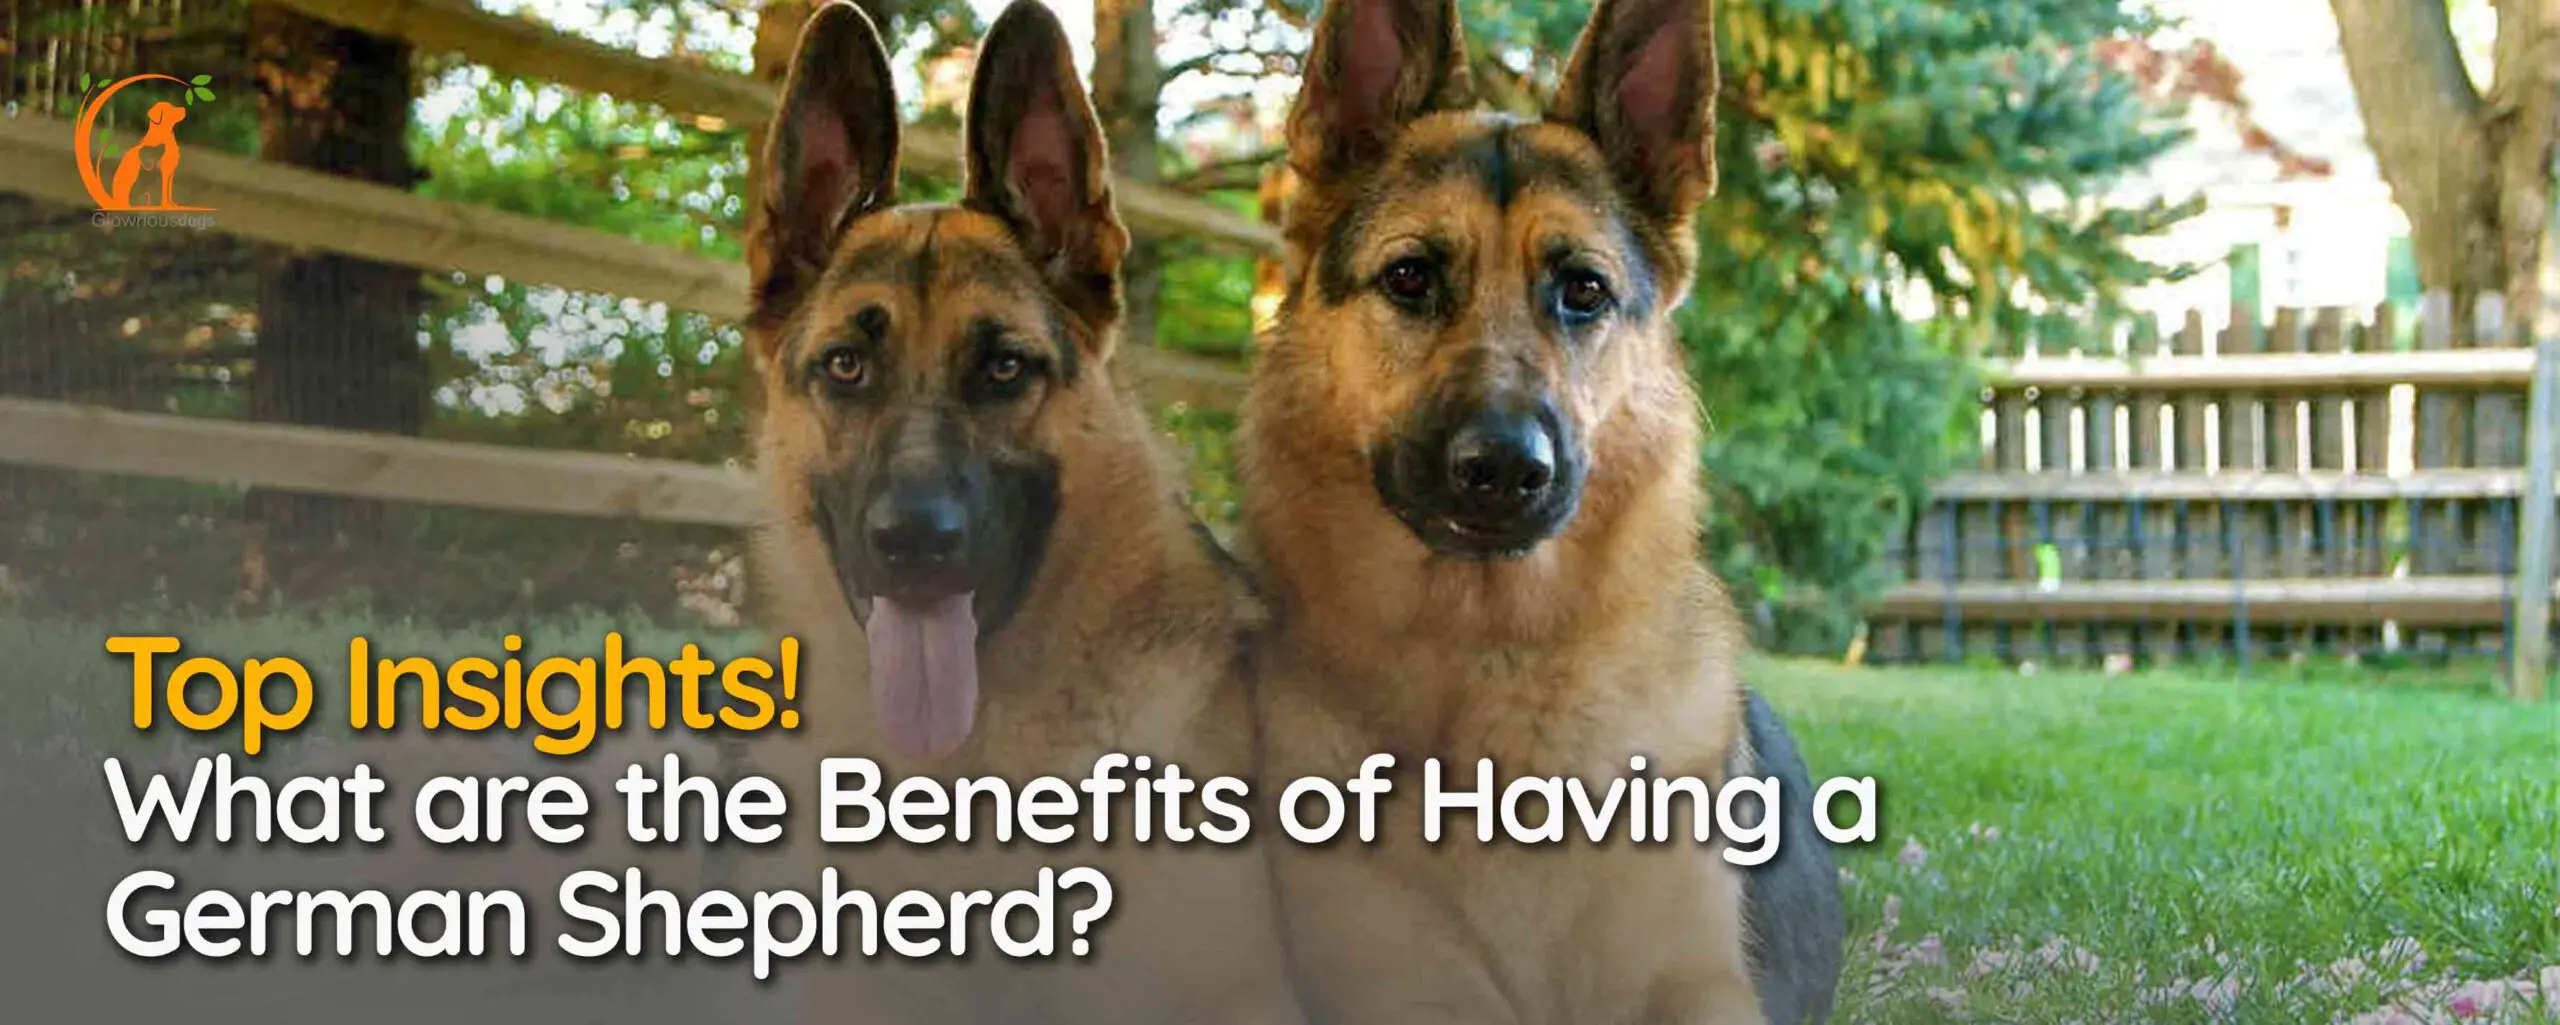 What are the Benefits of Having a German Shepherd